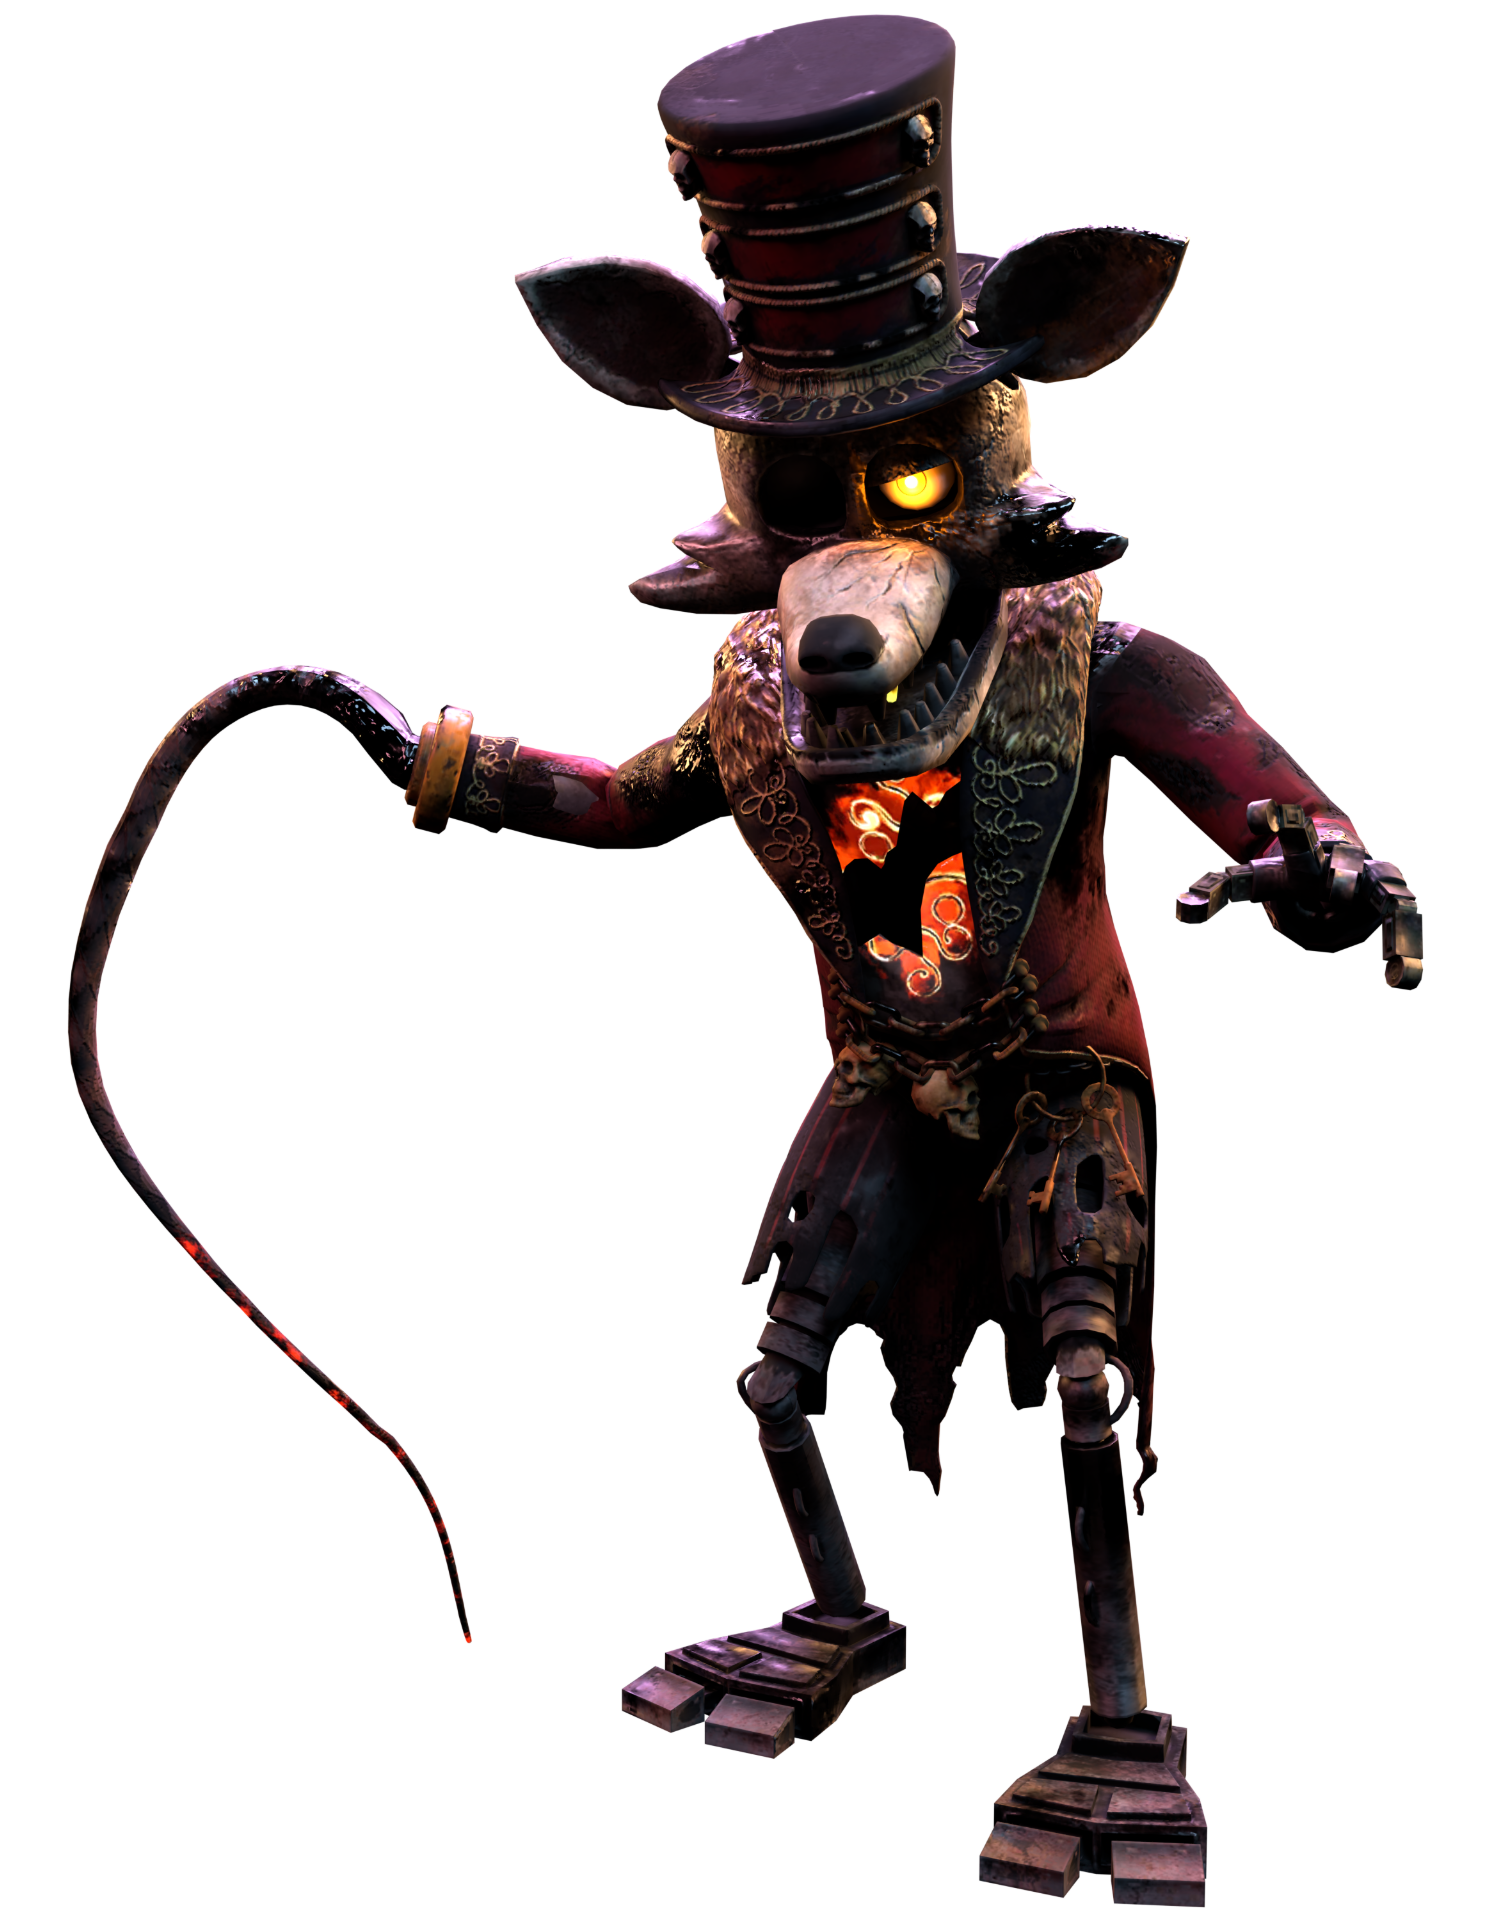 FNAF ANIMATRONIC FOXY THE PIRATE action figure size 9 Five Nights